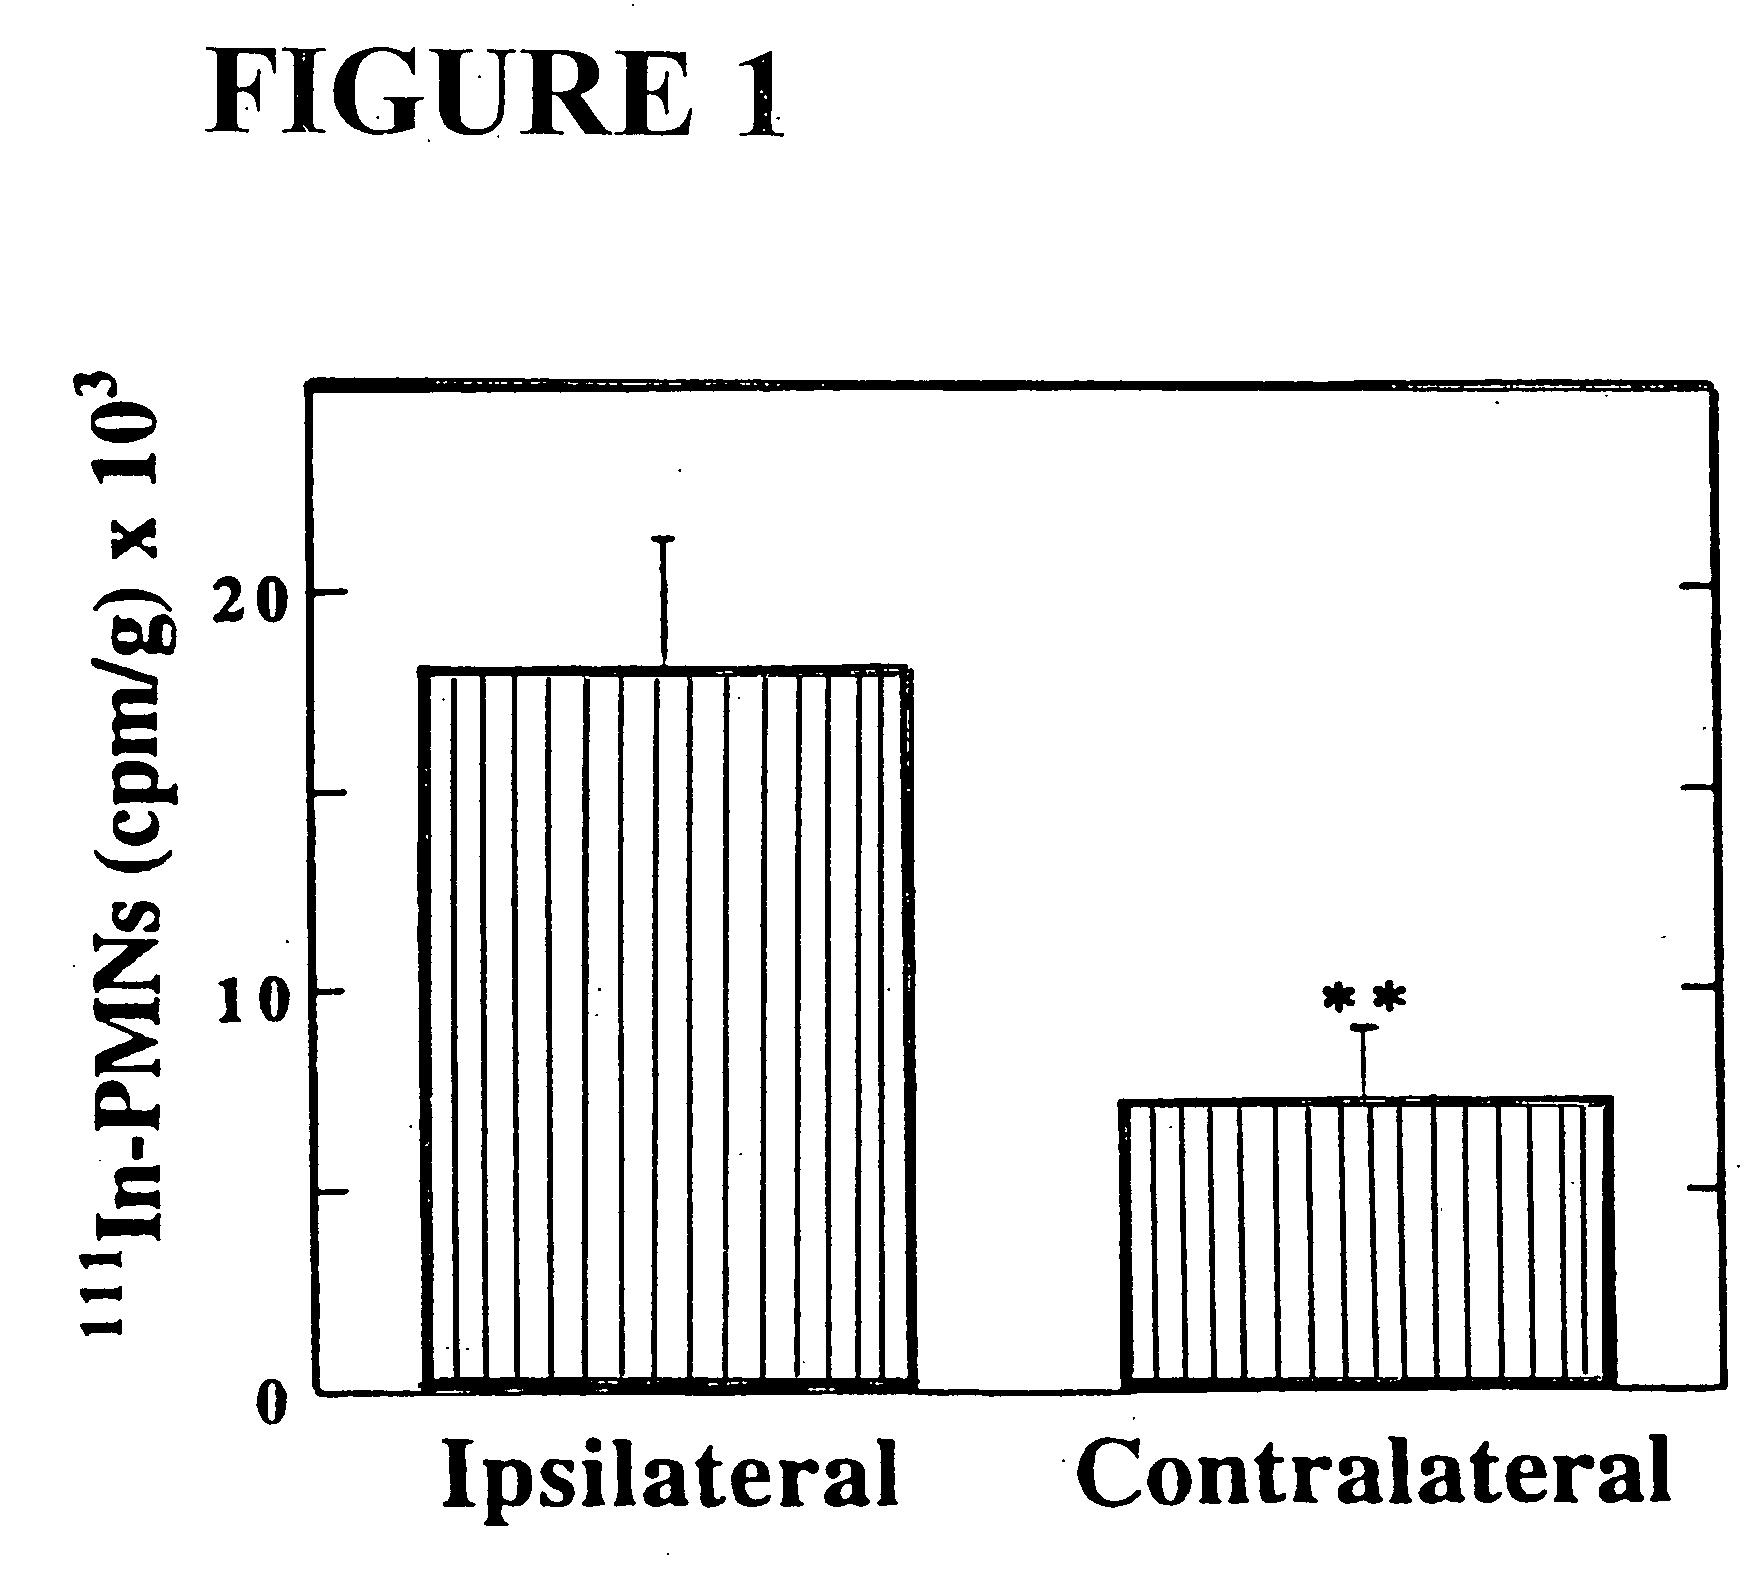 Methods for treating ischemic disorders using carbon monoxide